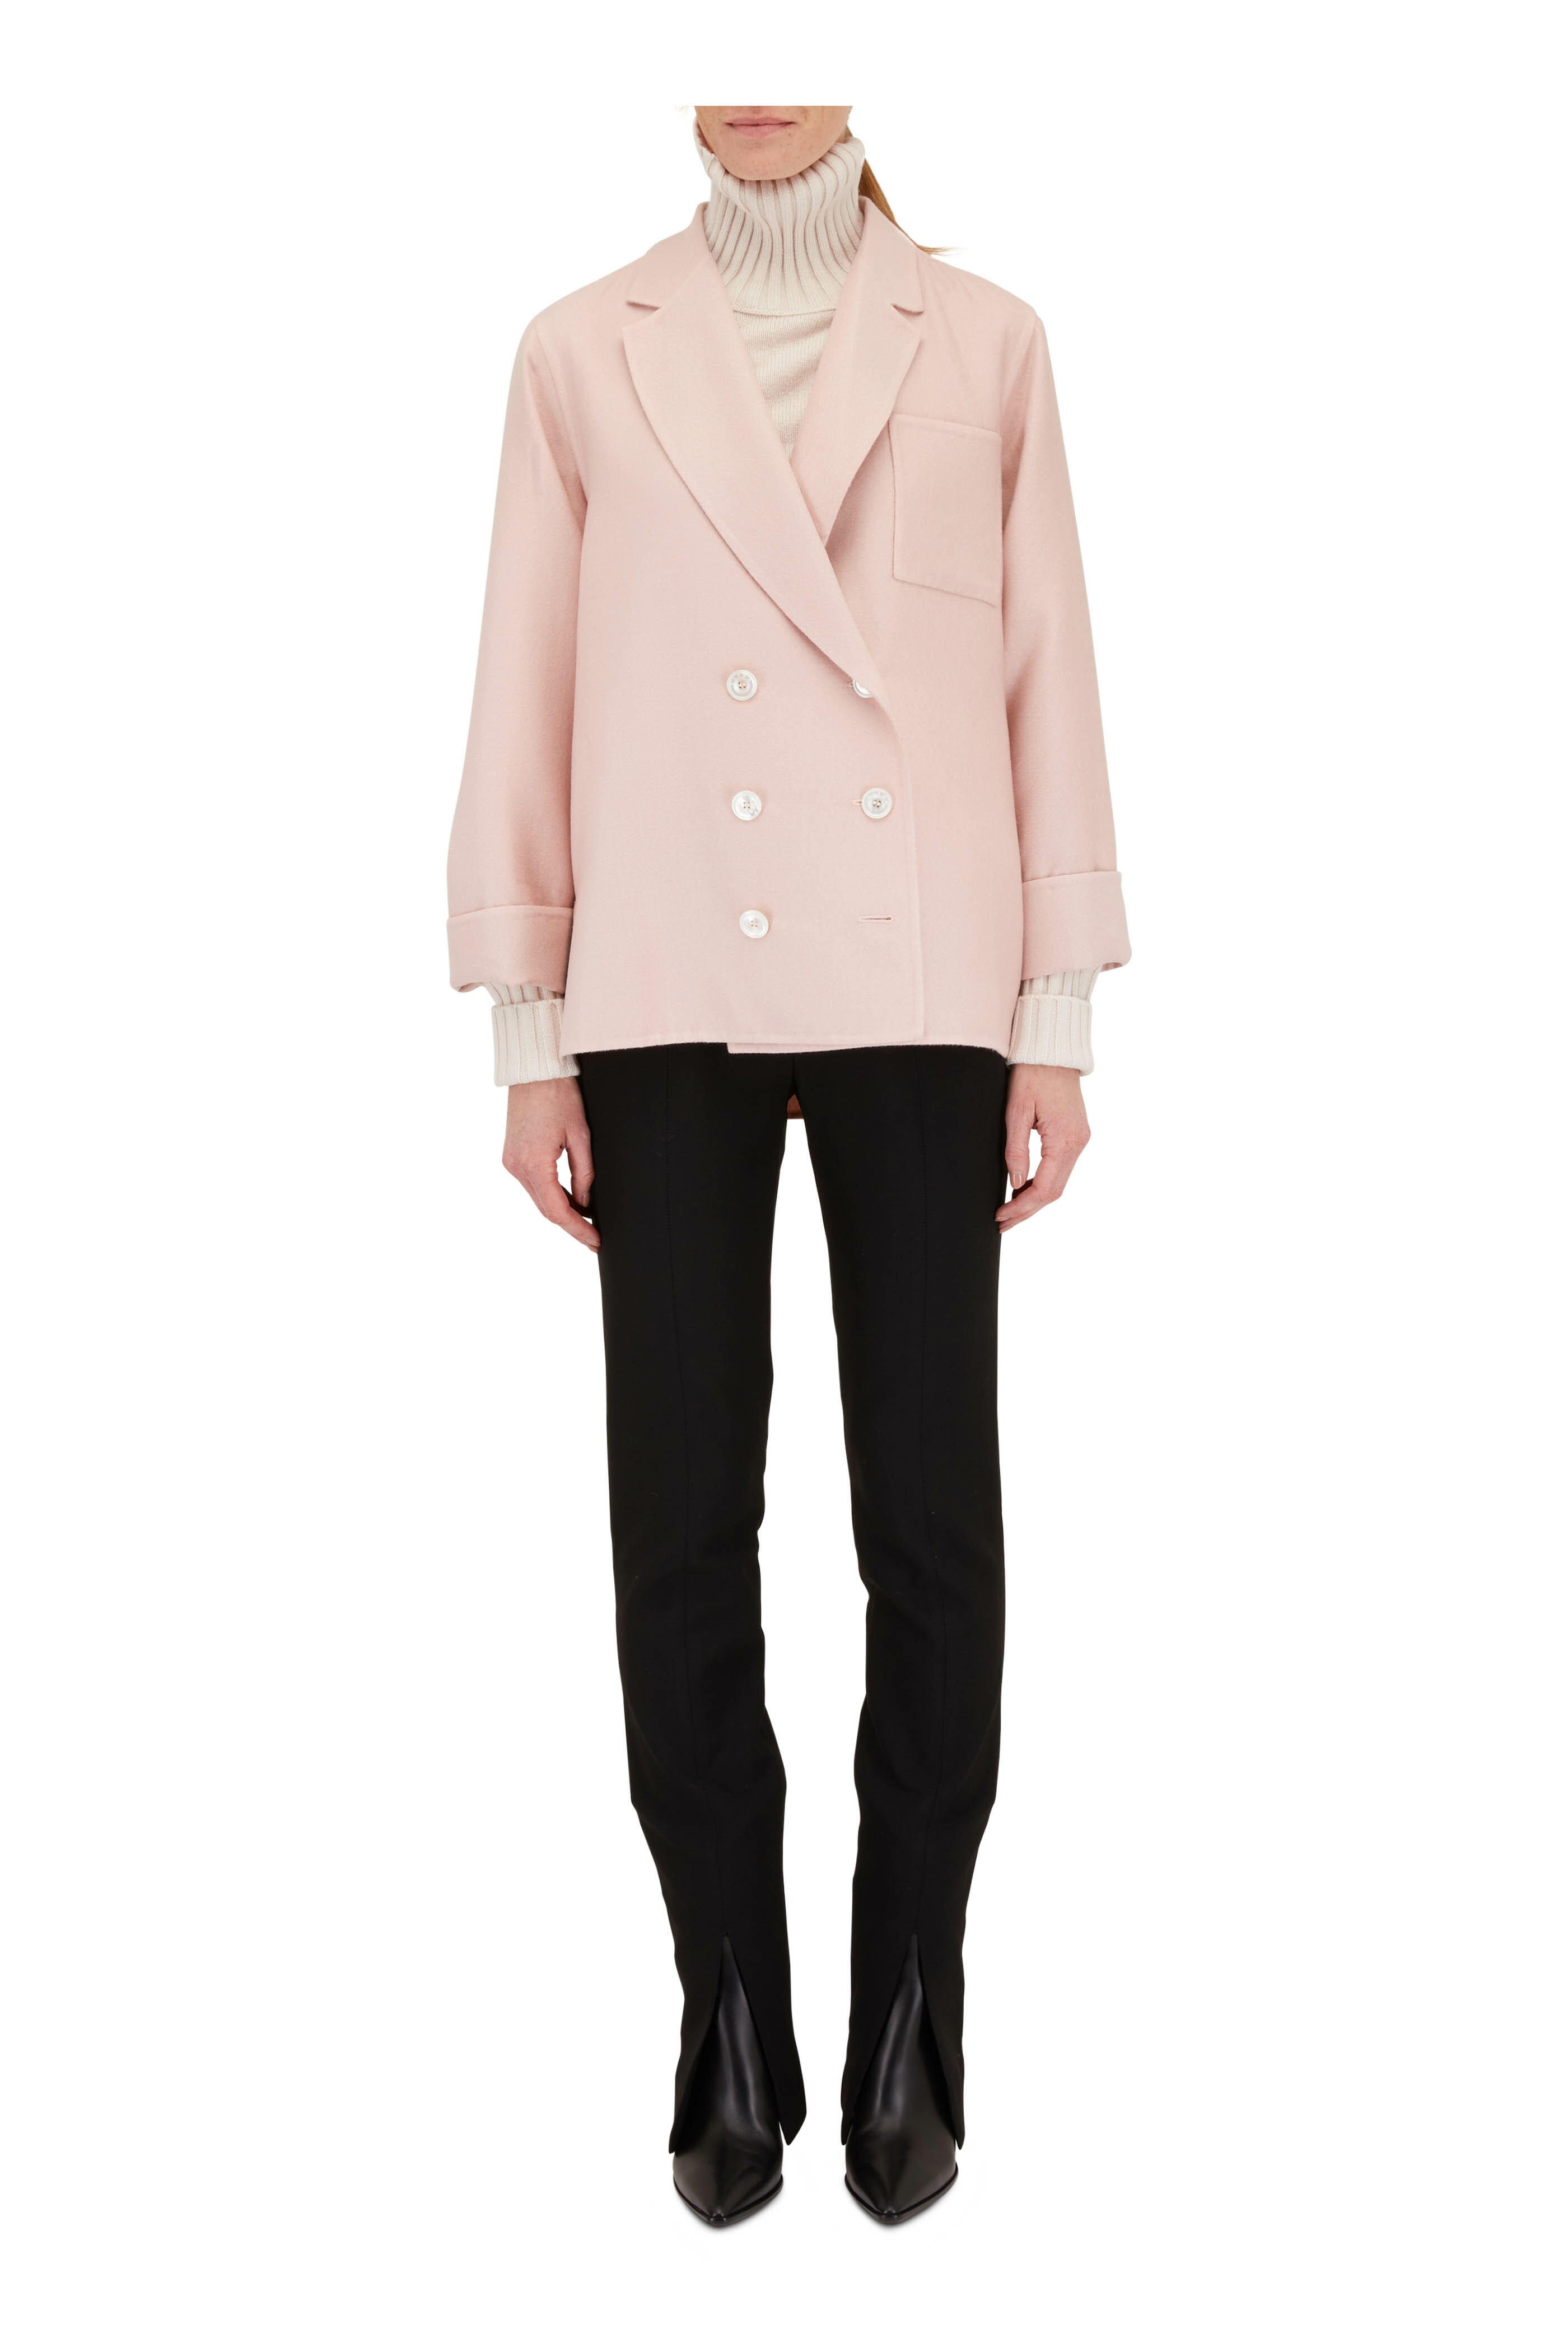 Kiton - Pink Loose Double-Breasted Cashmere Jacket